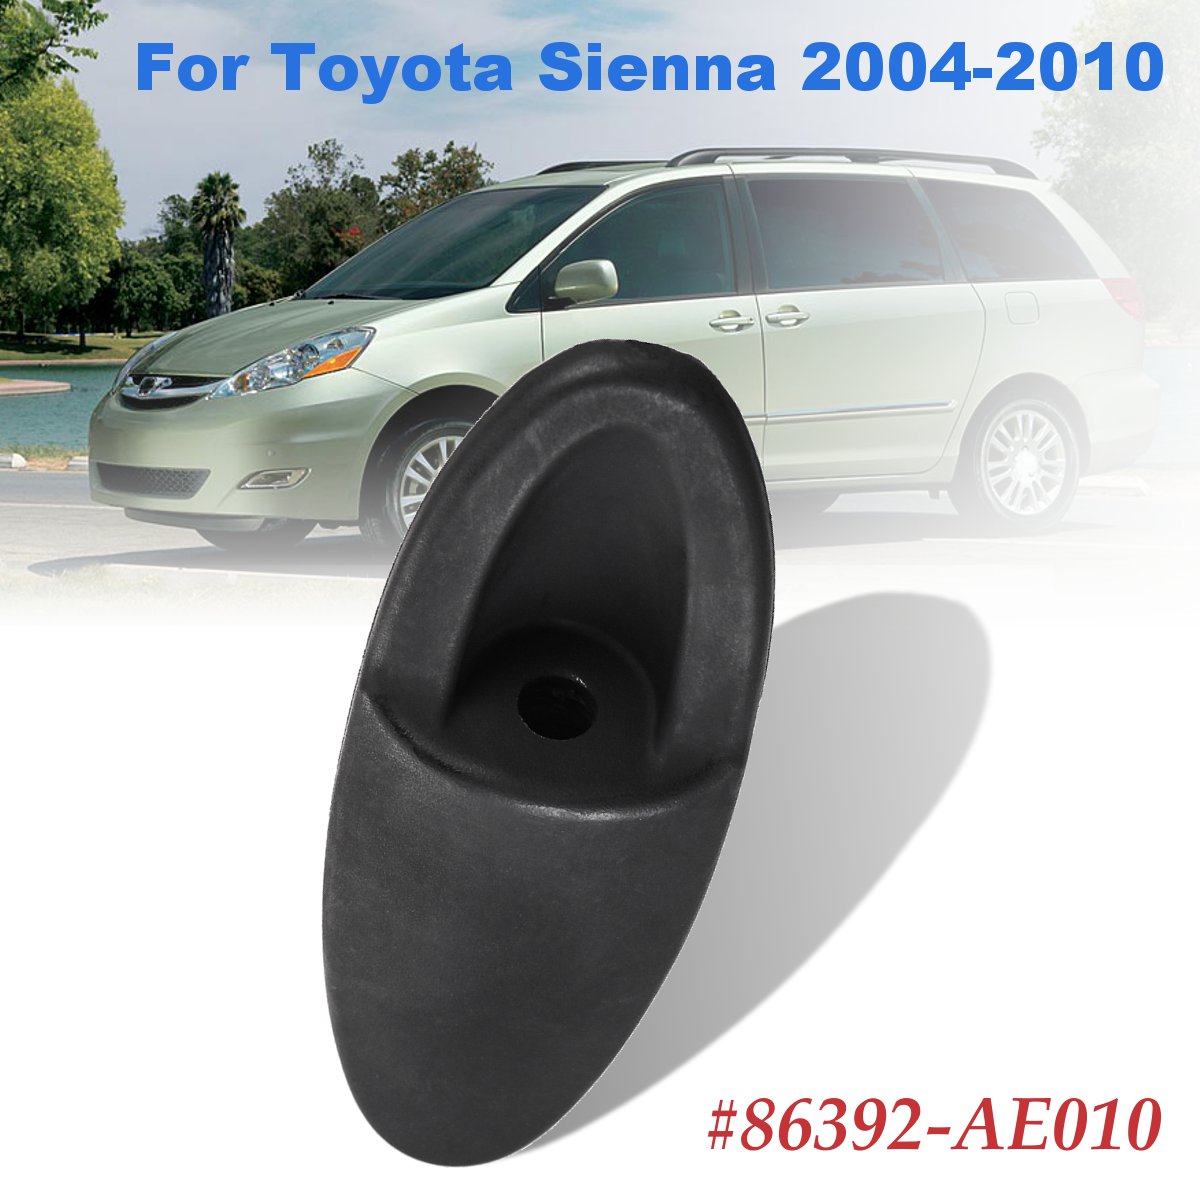 Antenna Base Bezel for 2004-2010 Toyota Sienna Ornament Replacement 86392-AE010